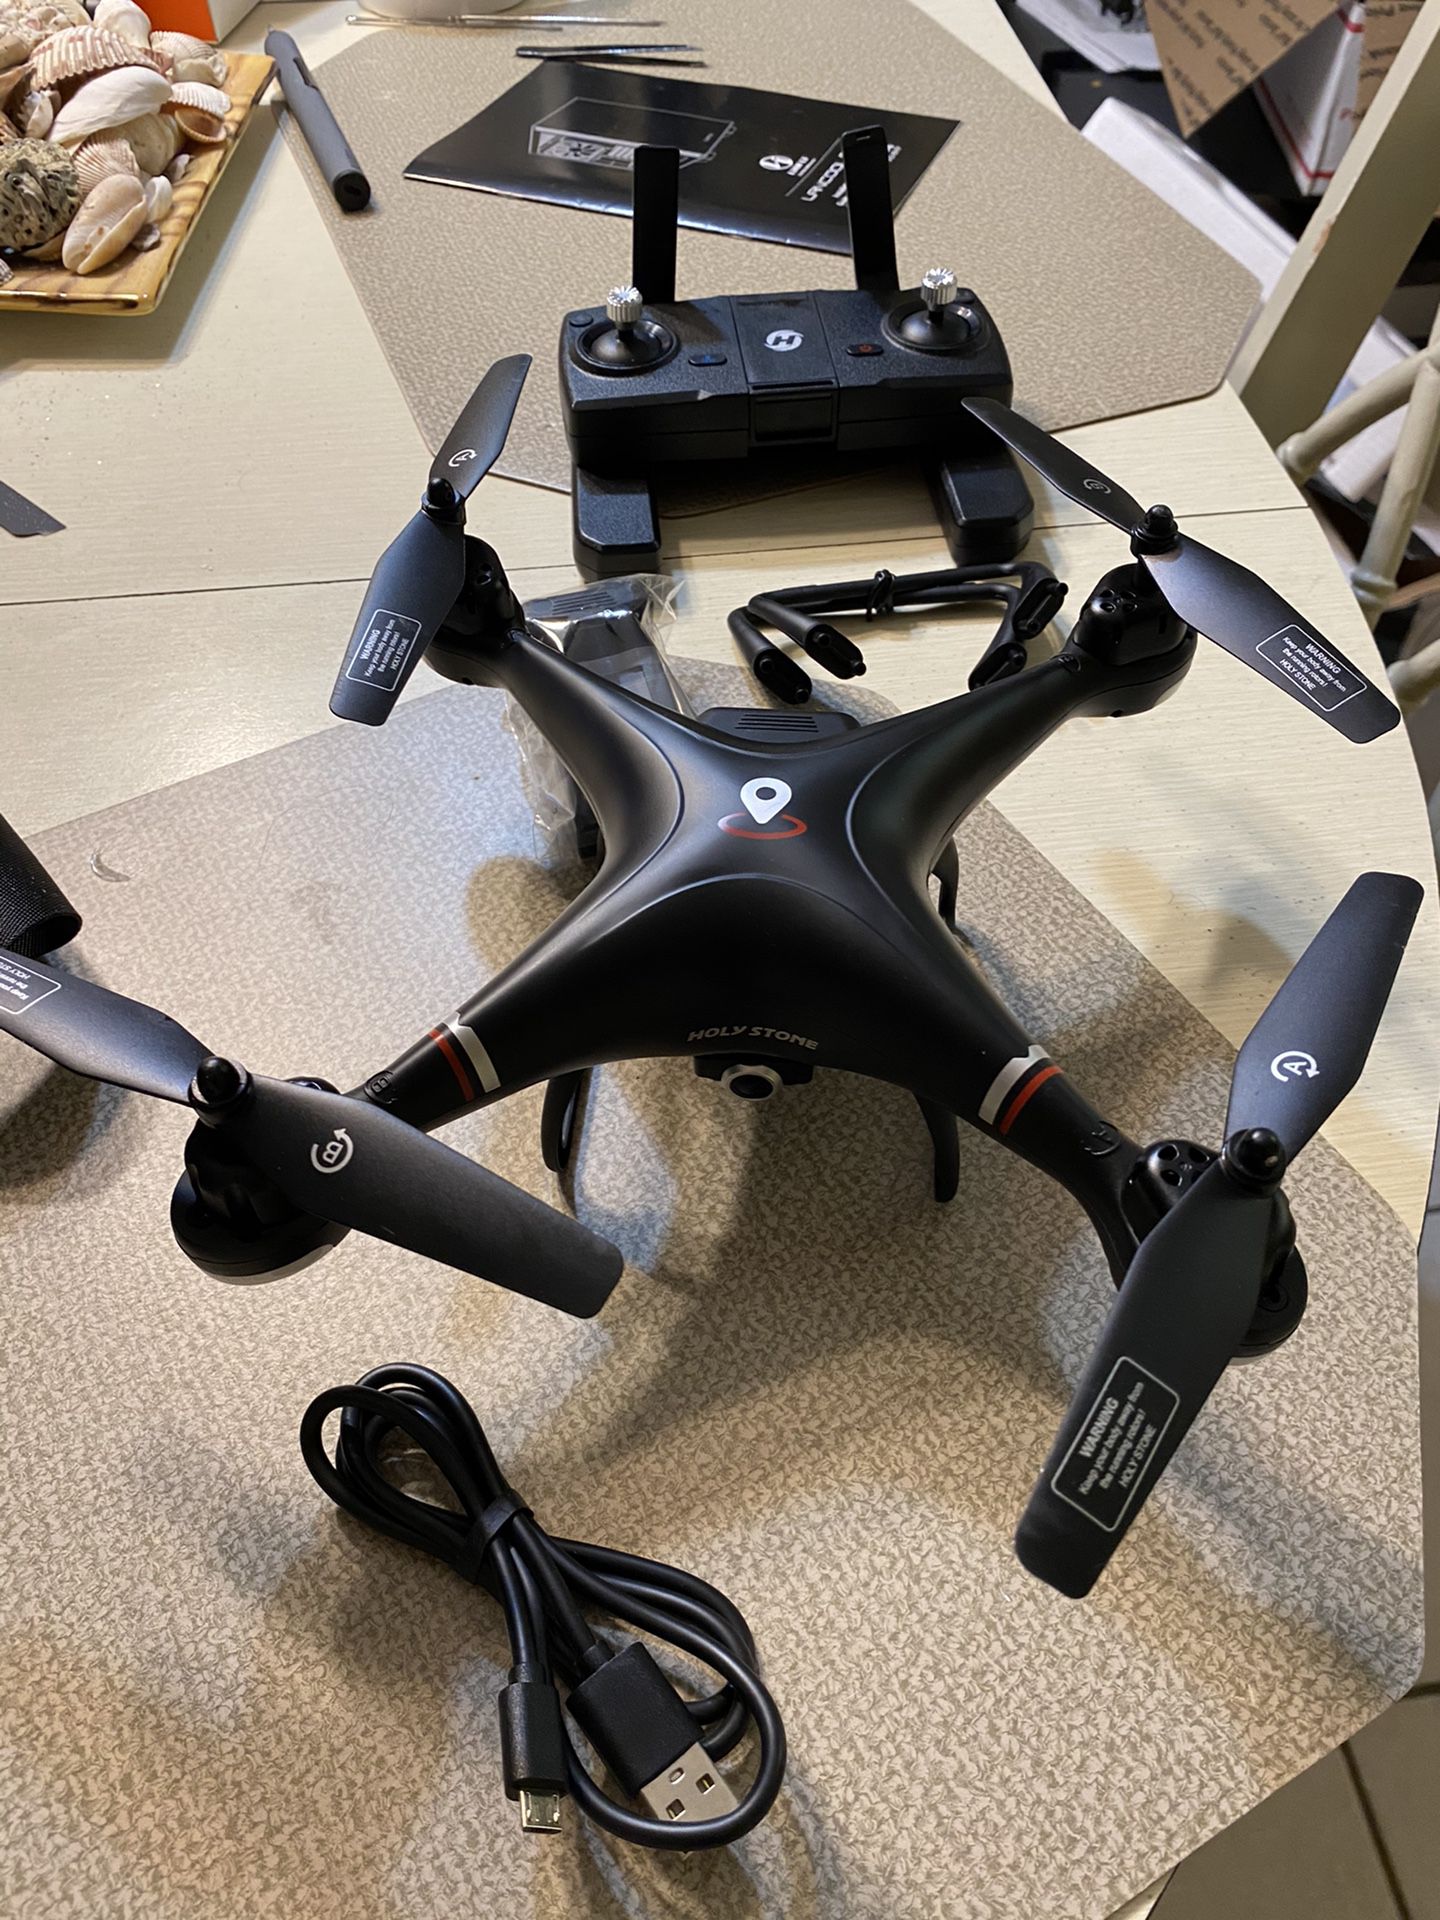 Holy stone HS120D GPS drone with camera